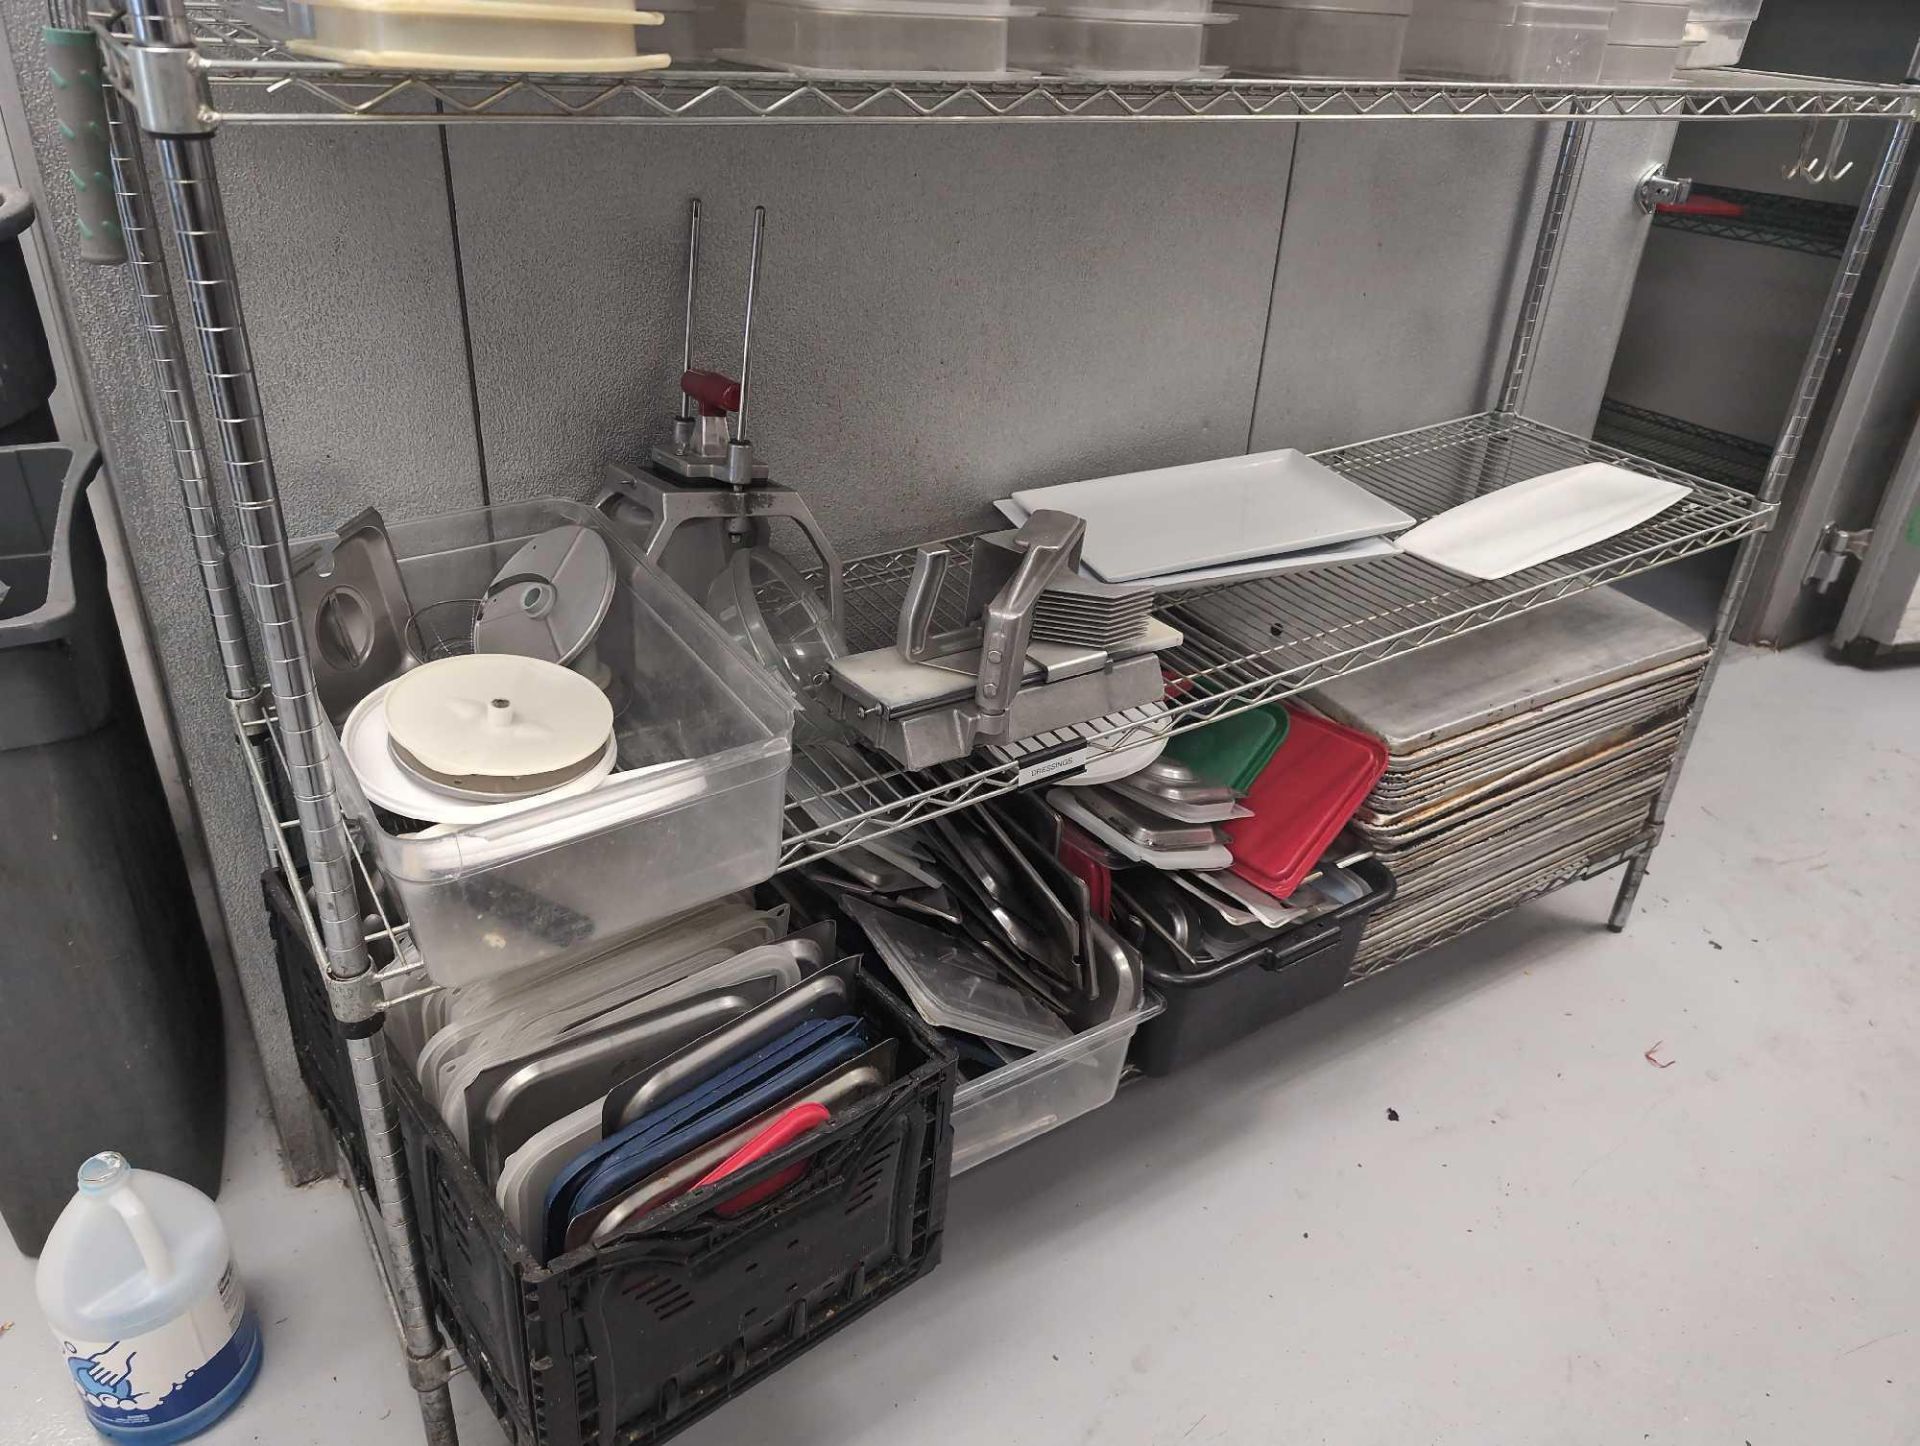 Stainless shelving unit with multiple plastic food containers. Strainers cheese, grater tomato slice - Image 5 of 8